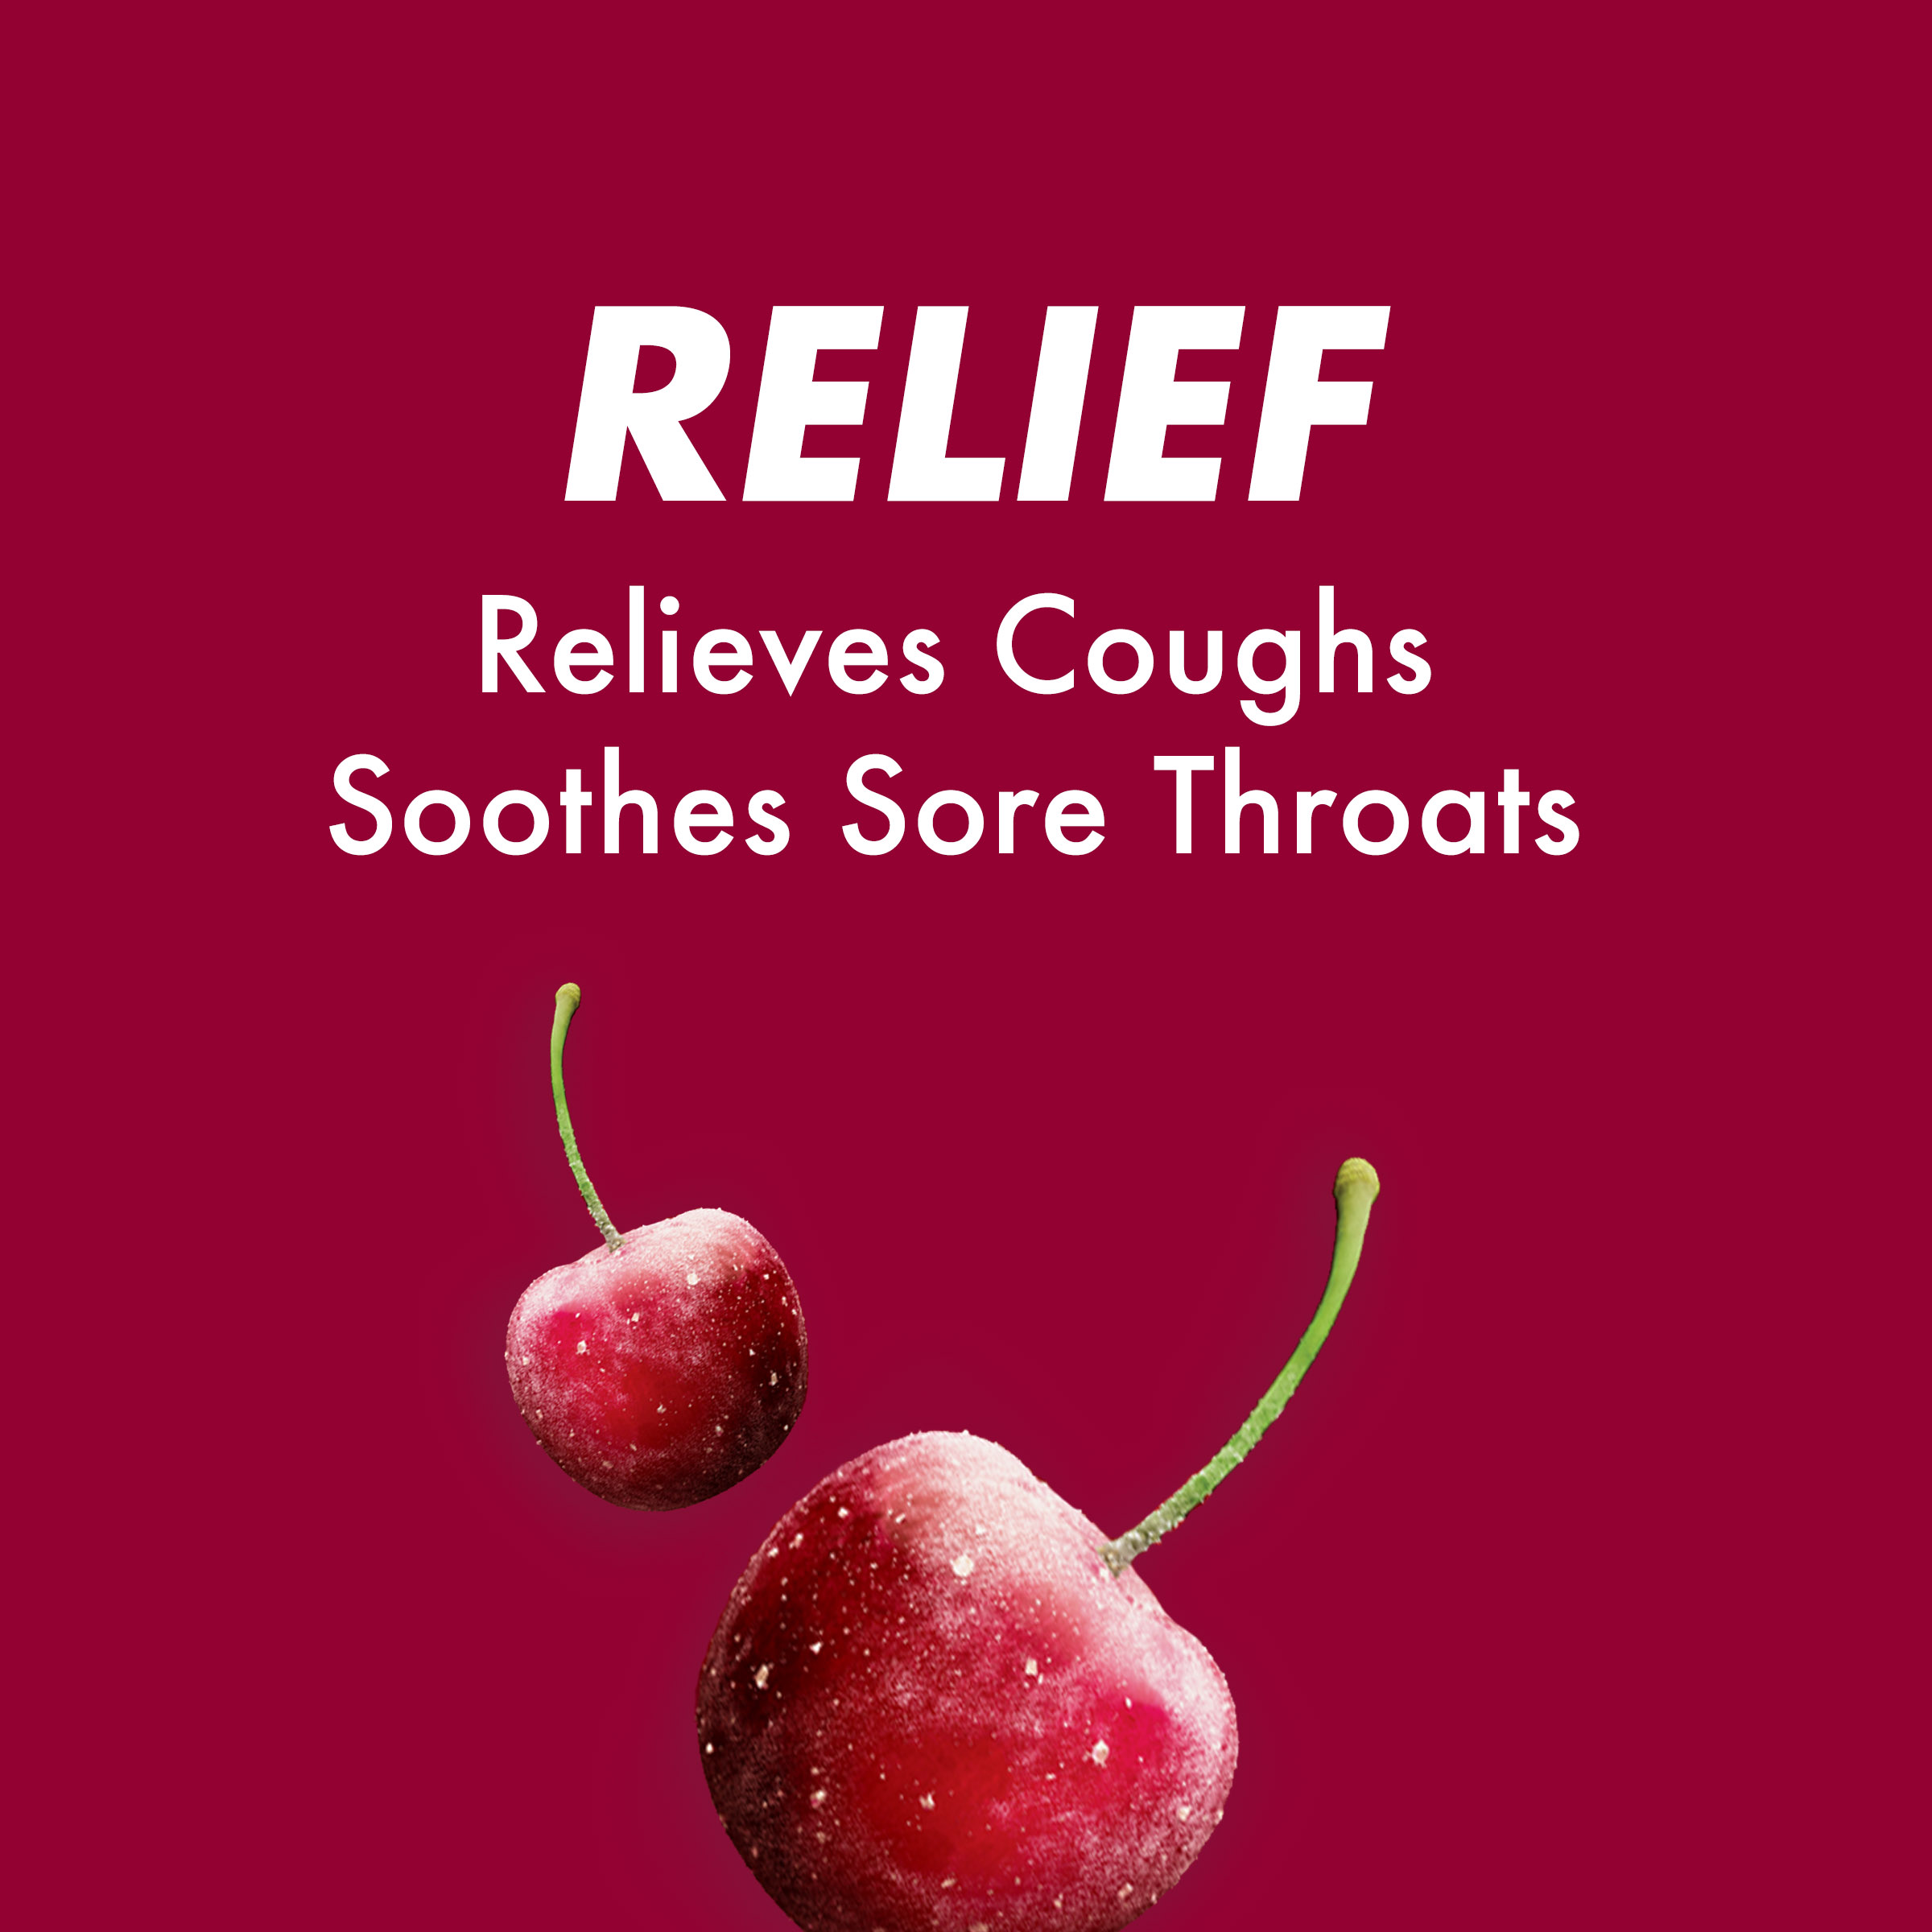 HALLS Relief Cherry Cough Drops, Economy Pack, 80 Drops - image 4 of 12